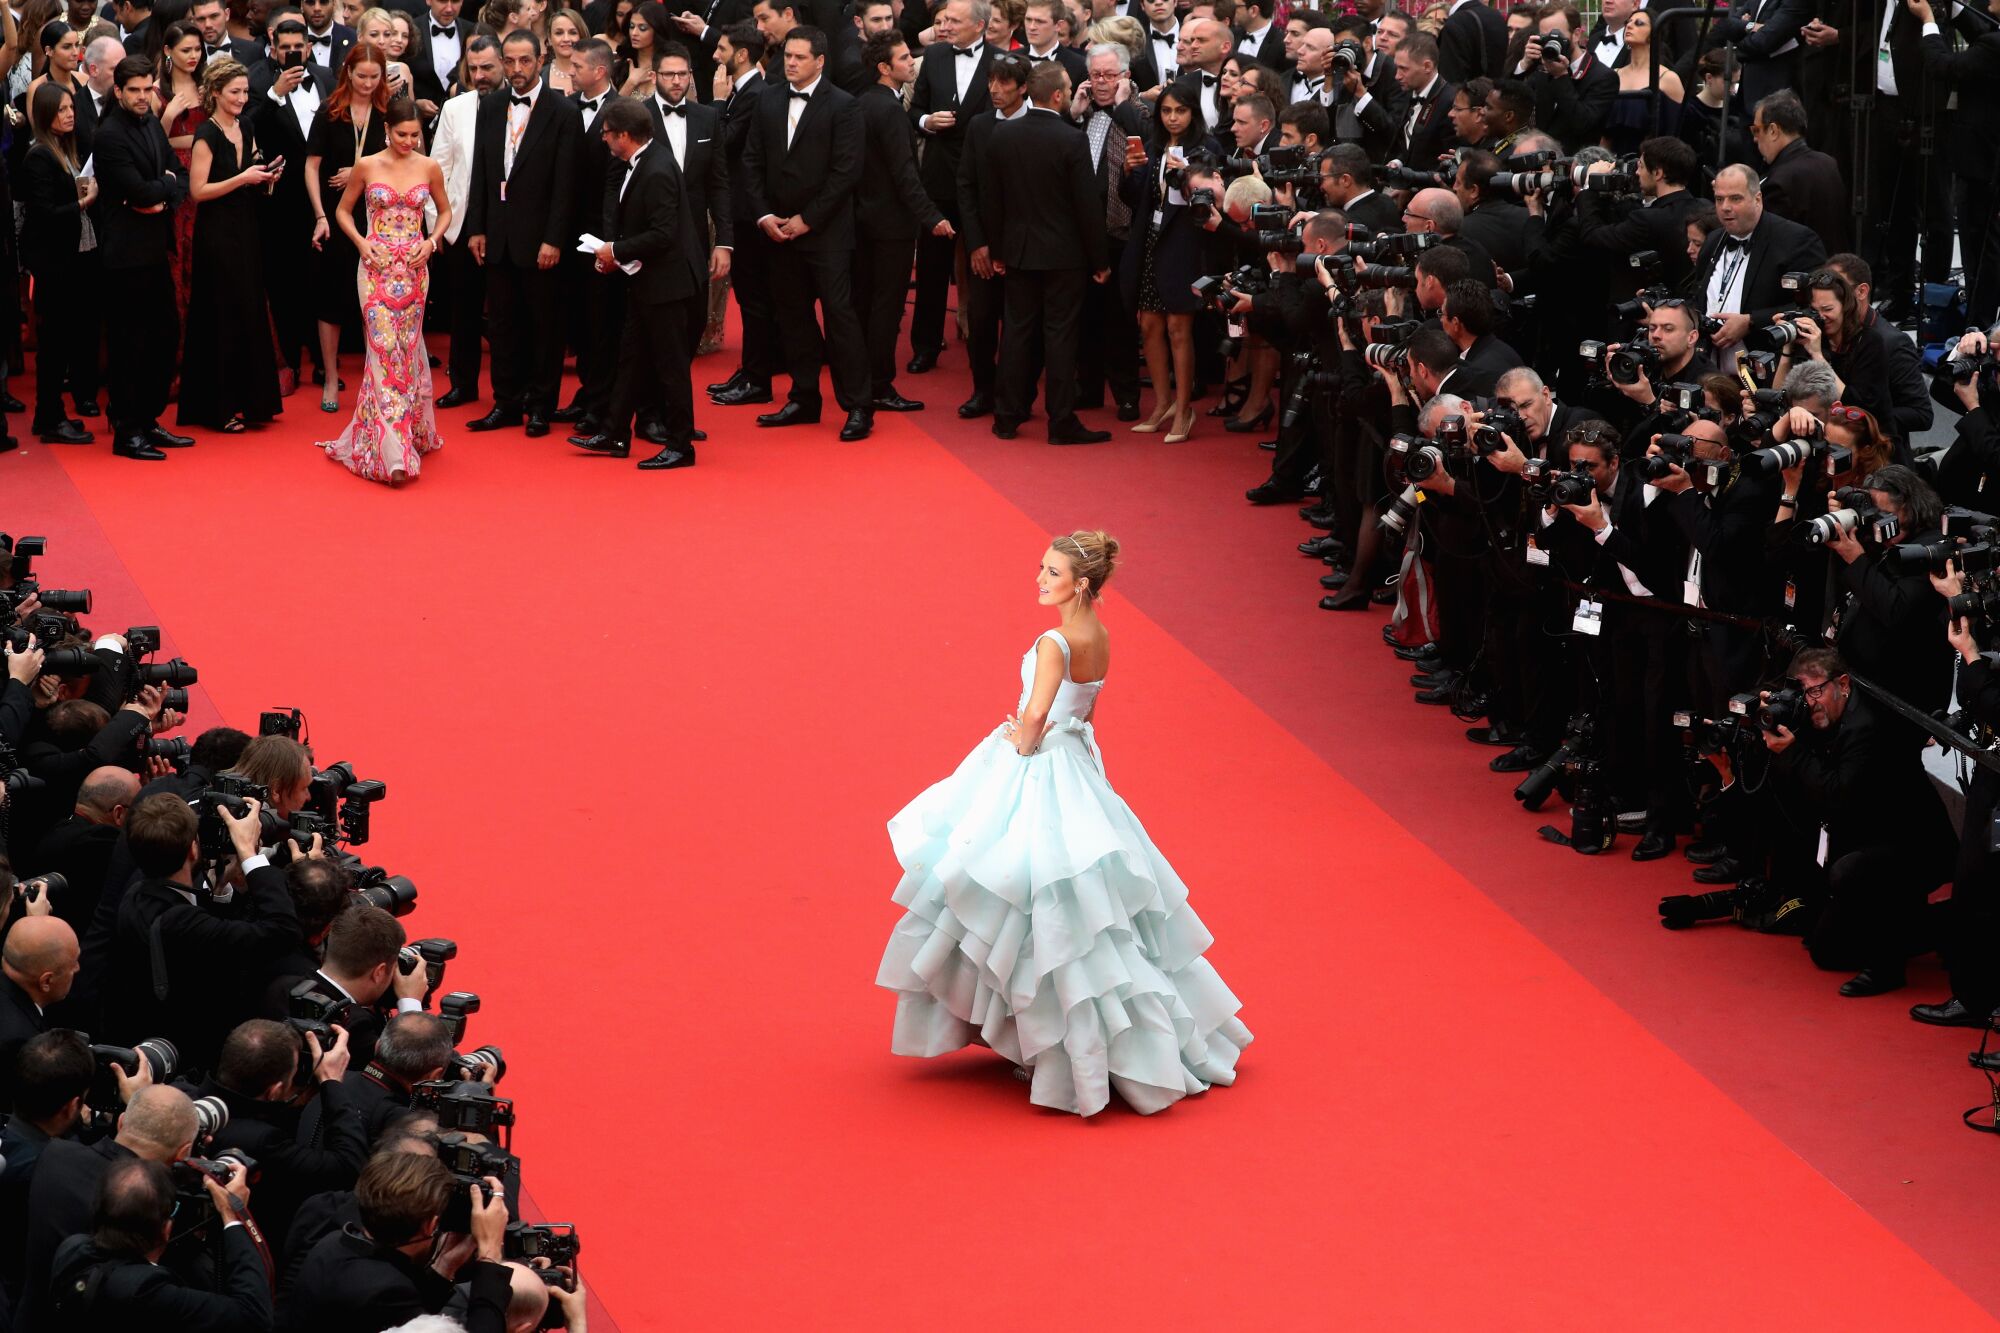 A woman in a flouncy light blue ball gown is the center of attention on a red carpet.